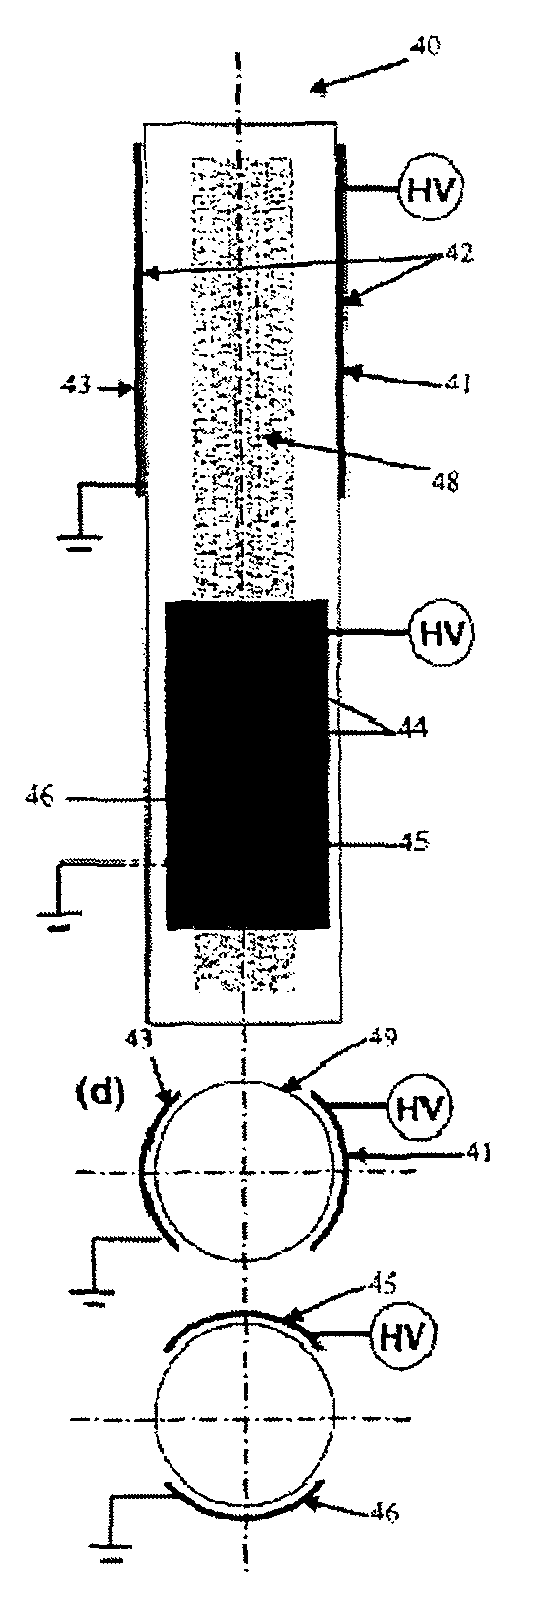 Plasma surface treatment using dielectric barrier discharges